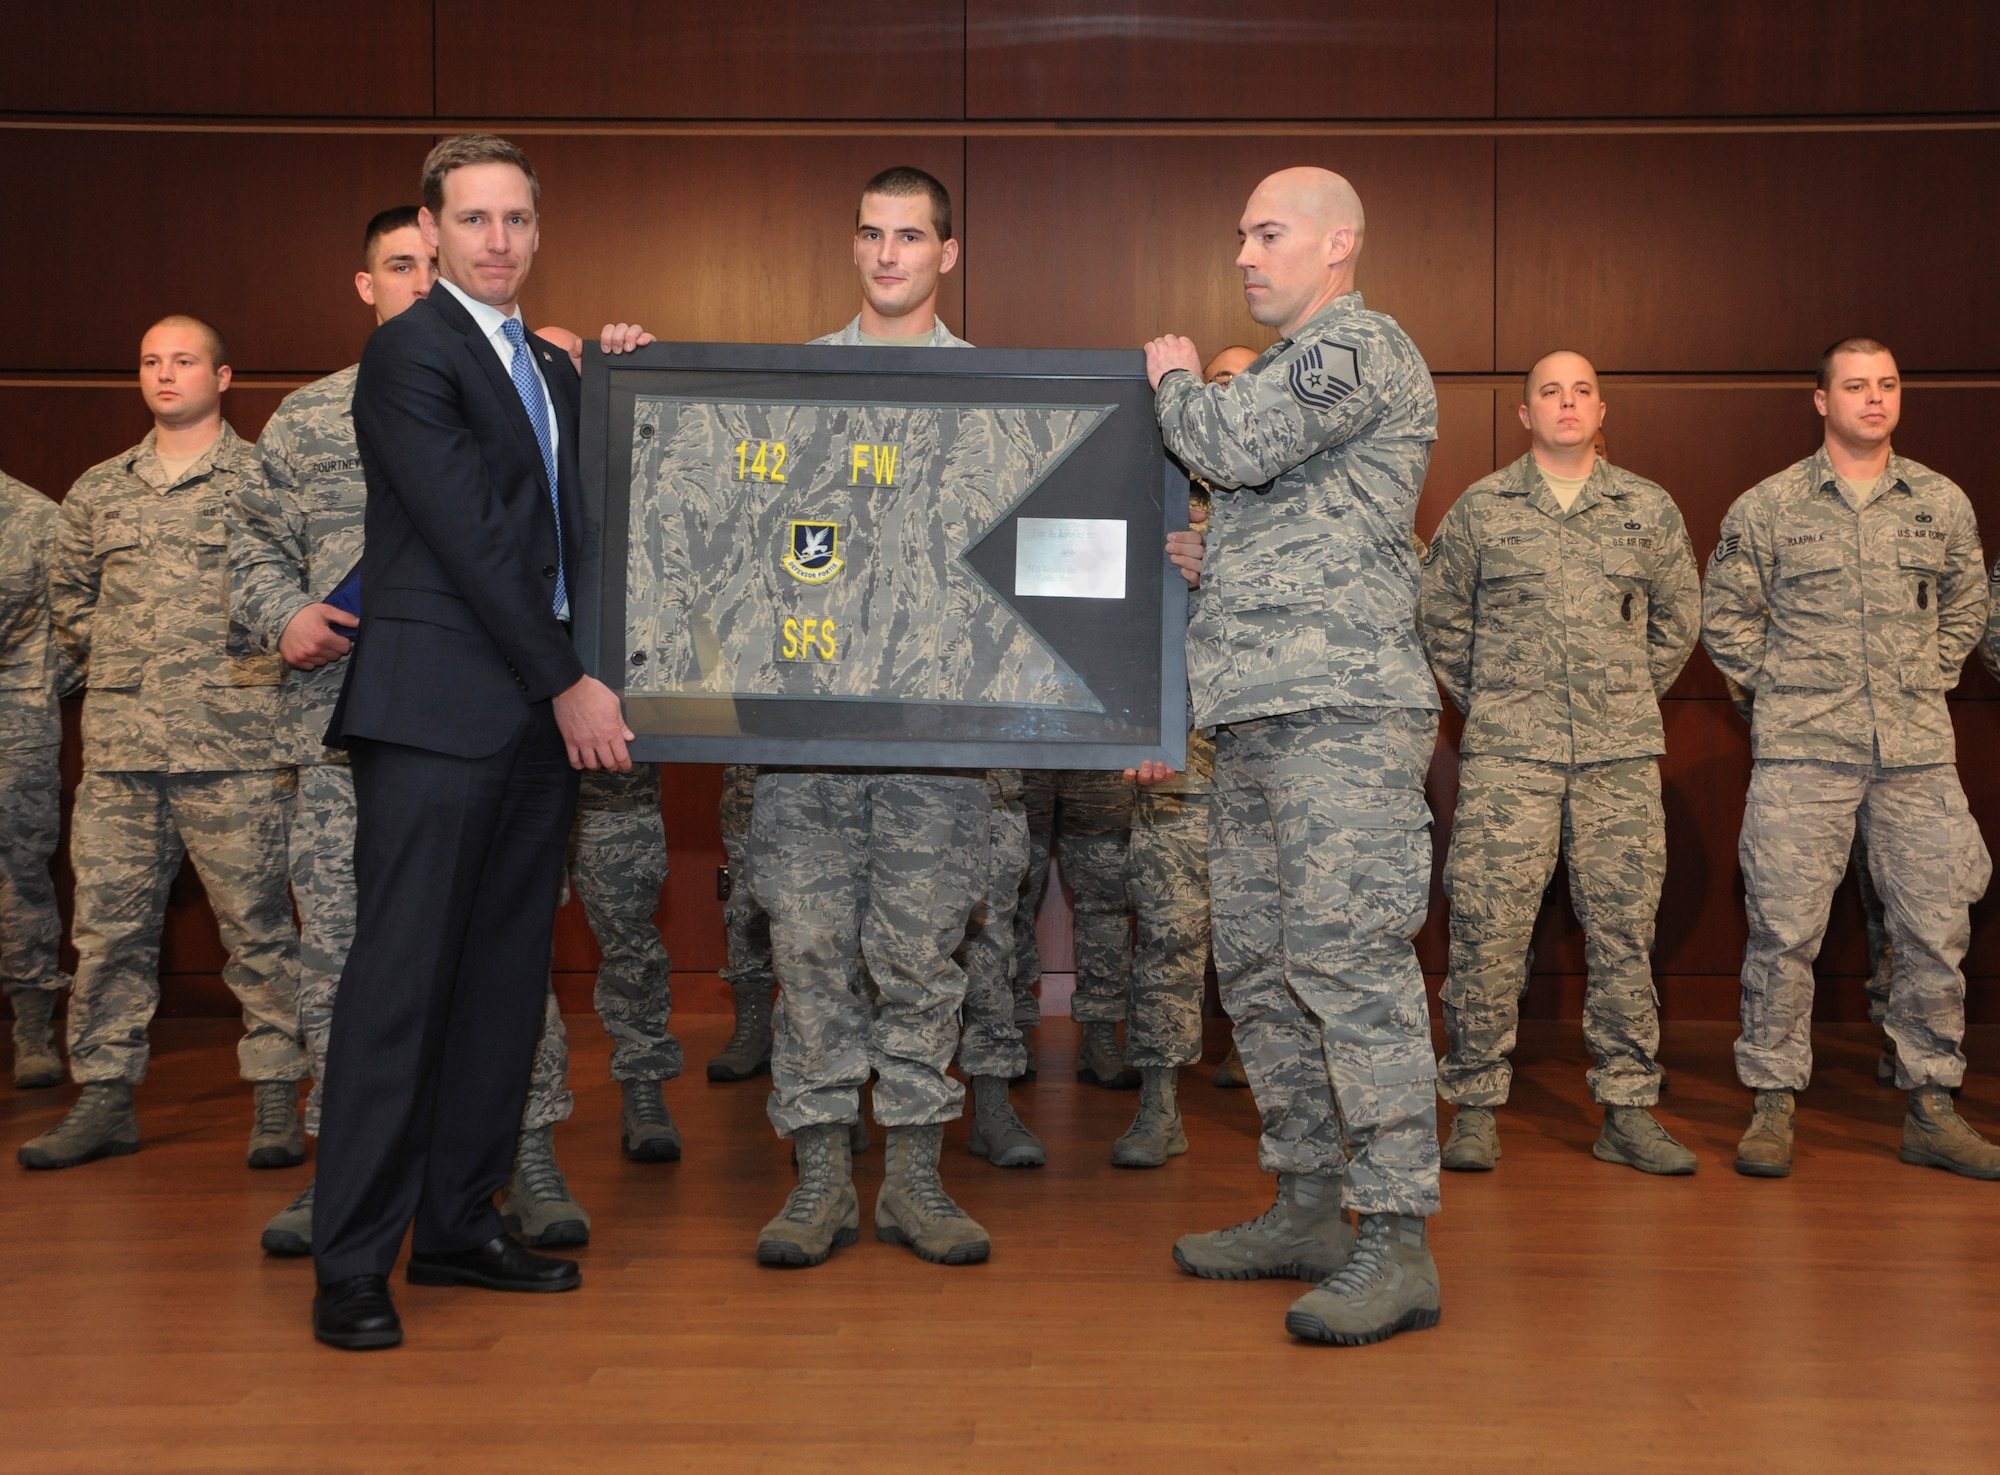 Mr. Cameron Smith receives a framed unit guidon from Oregon Air National Guard Master Sgt. Derek Moore, 142nd Fighter Wing Security Forces Squadron, during the mobilization ceremony for the 142nd Fighter Wing Security Forces Squadron at Camp Withycombe, Ore., Dec. 11, 2012. Smith represented Oregon Governor John Kitzhaber for the ceremony and the unit guidon is on behalf of the entire group deploying as a reminder that Oregon’s sons and daughters are proudly answering the nation’s call. (U.S. Air Force photograph by Tech. Sgt. John Hughel, 142nd Fighter Wing Public Affairs/Released)